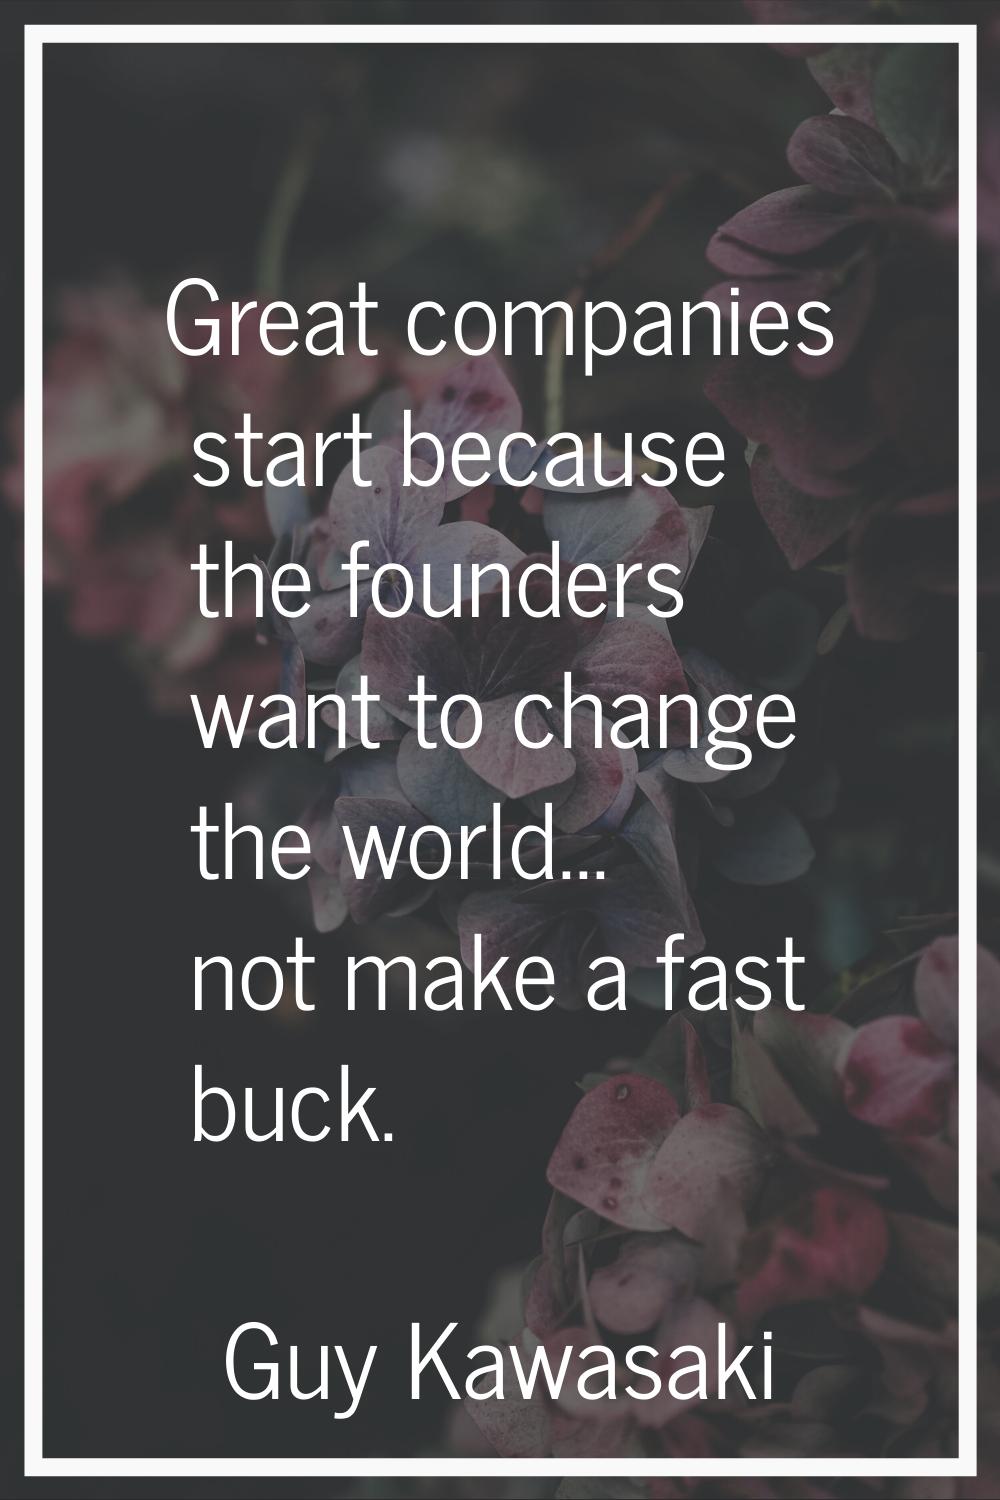 Great companies start because the founders want to change the world... not make a fast buck.